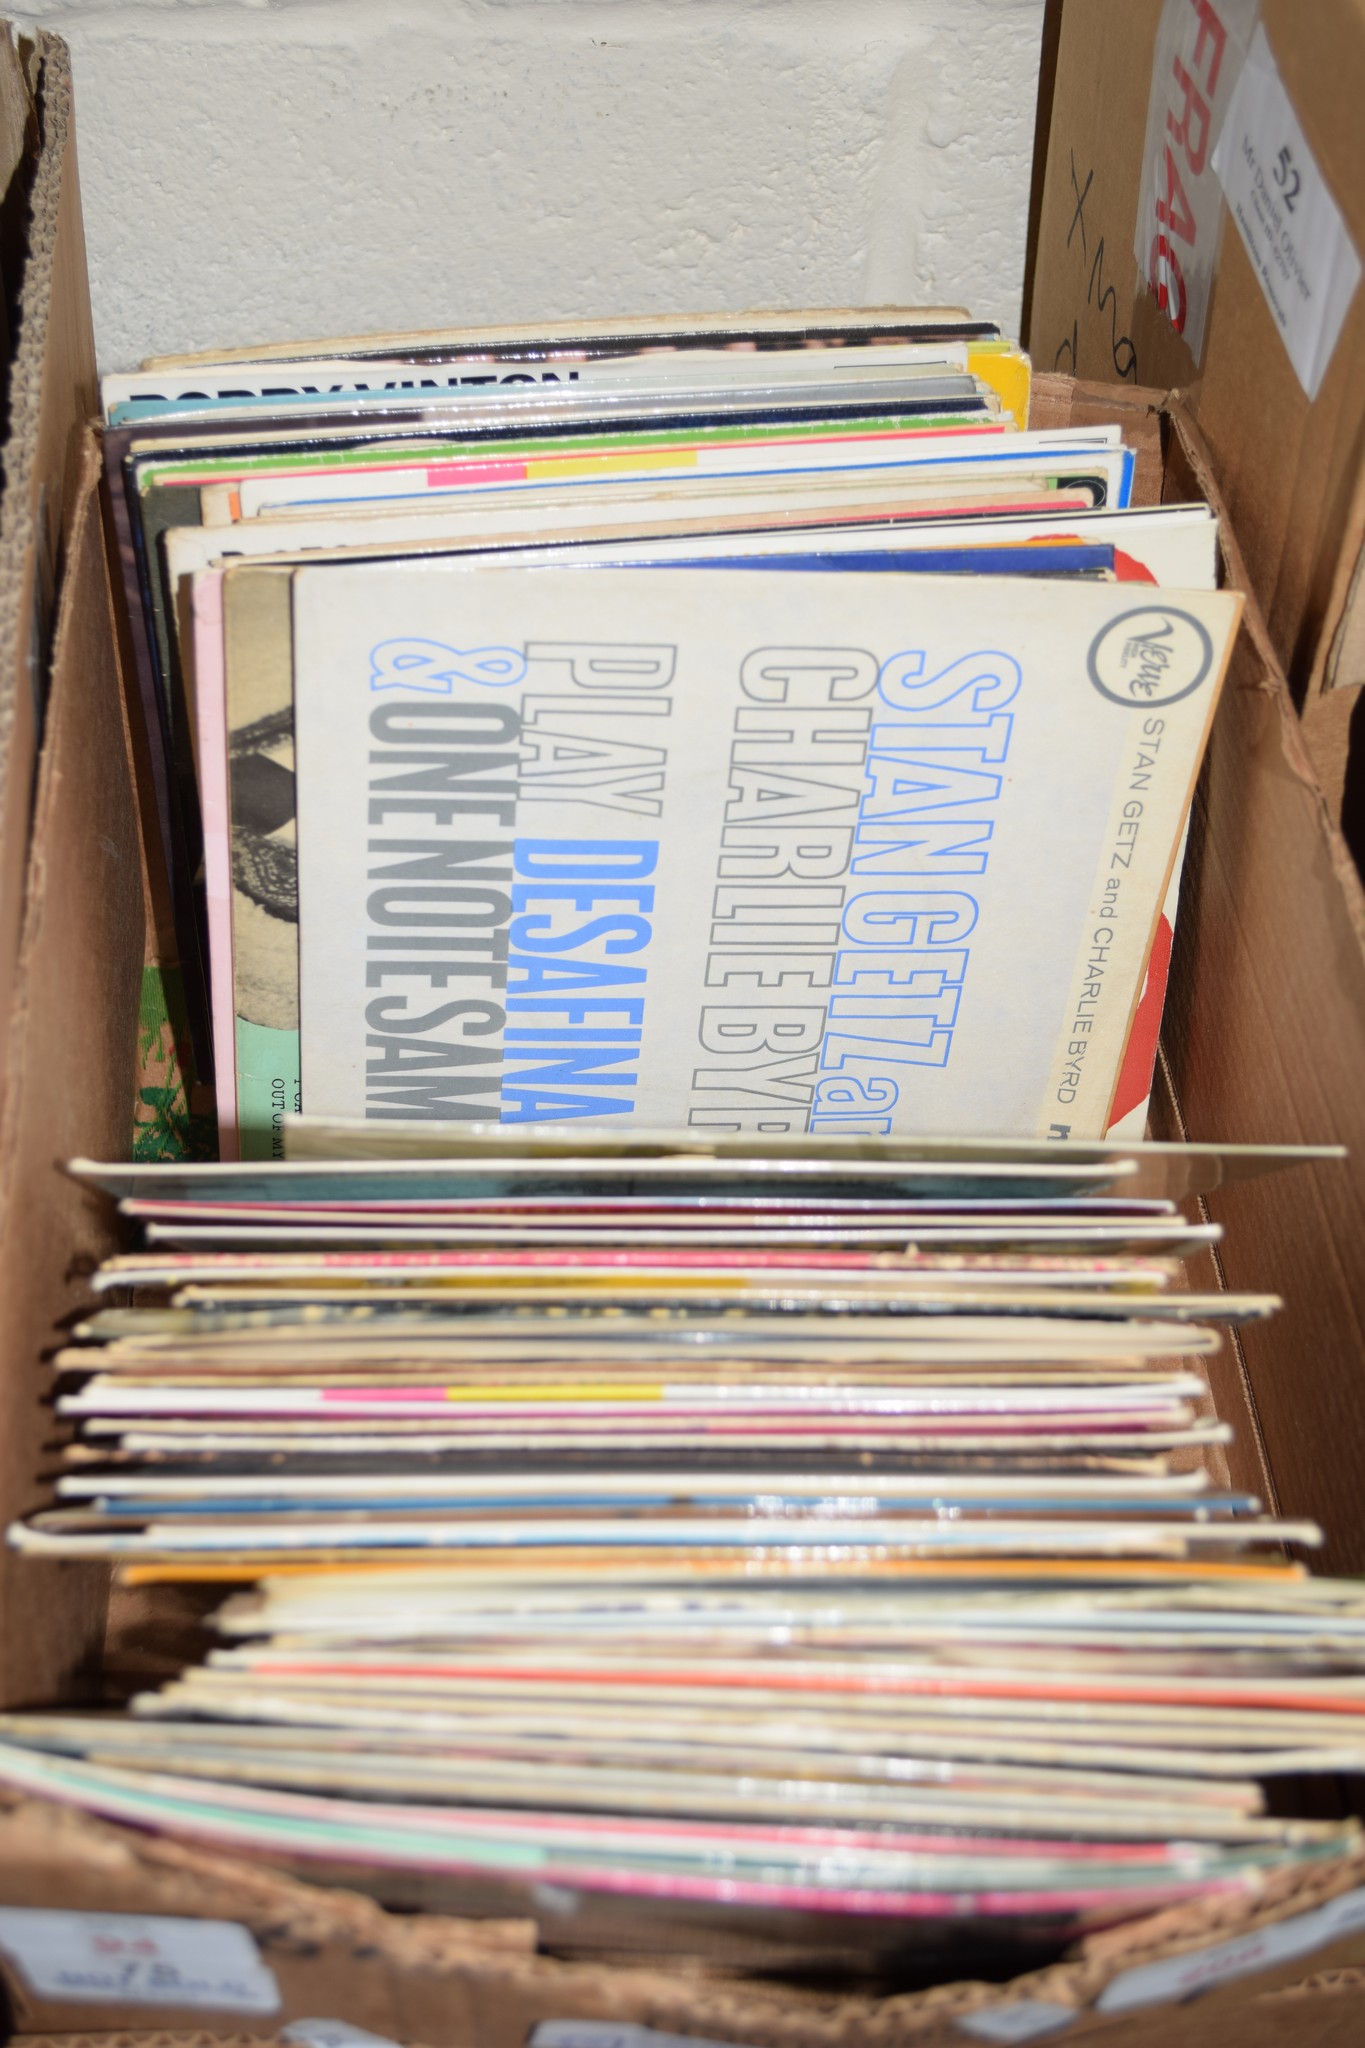 BOX CONTAINING 45RPM RECORDS - Image 3 of 3